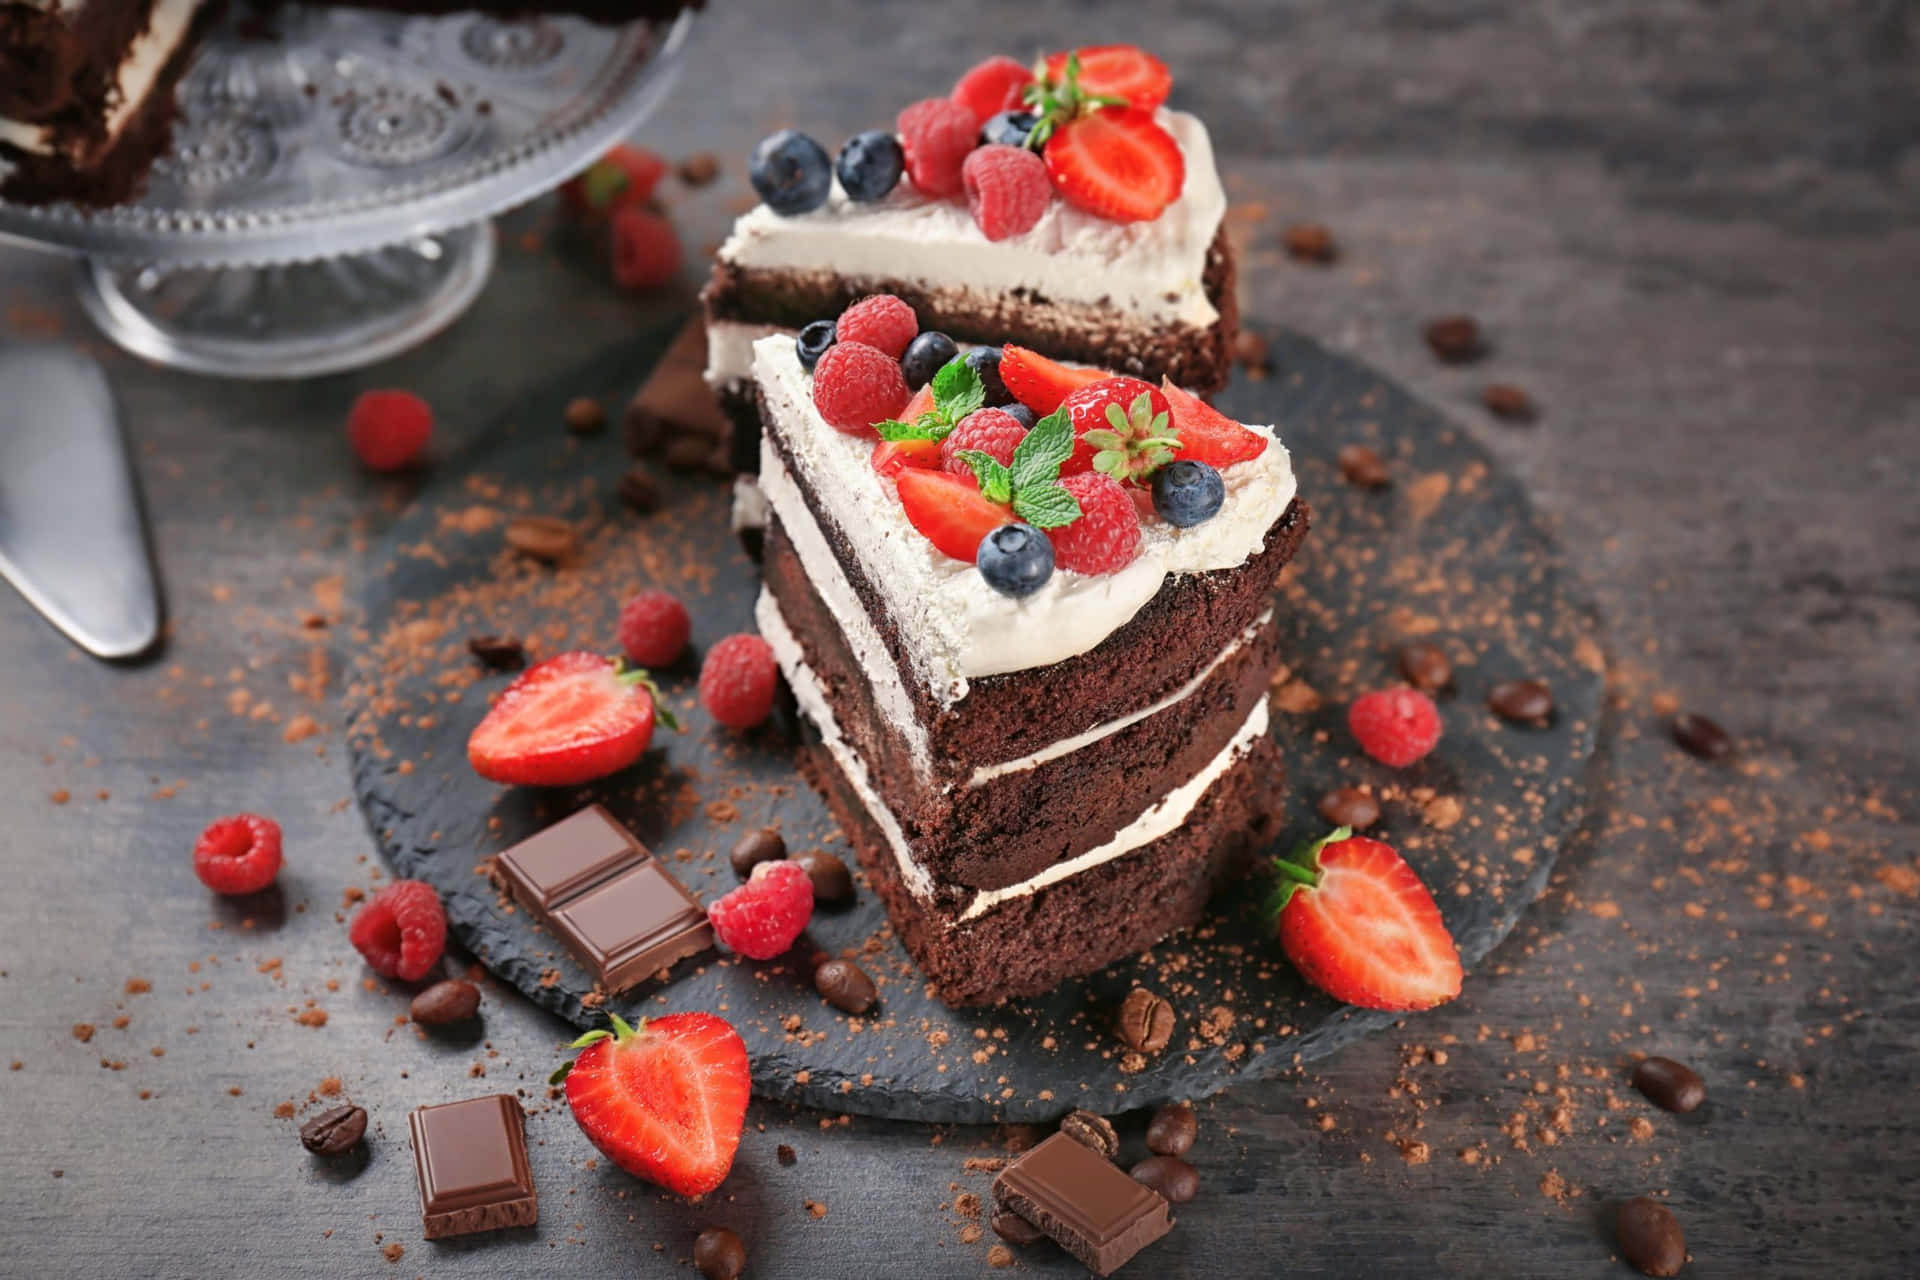 A Slice Of Chocolate Cake With Berries And Chocolate